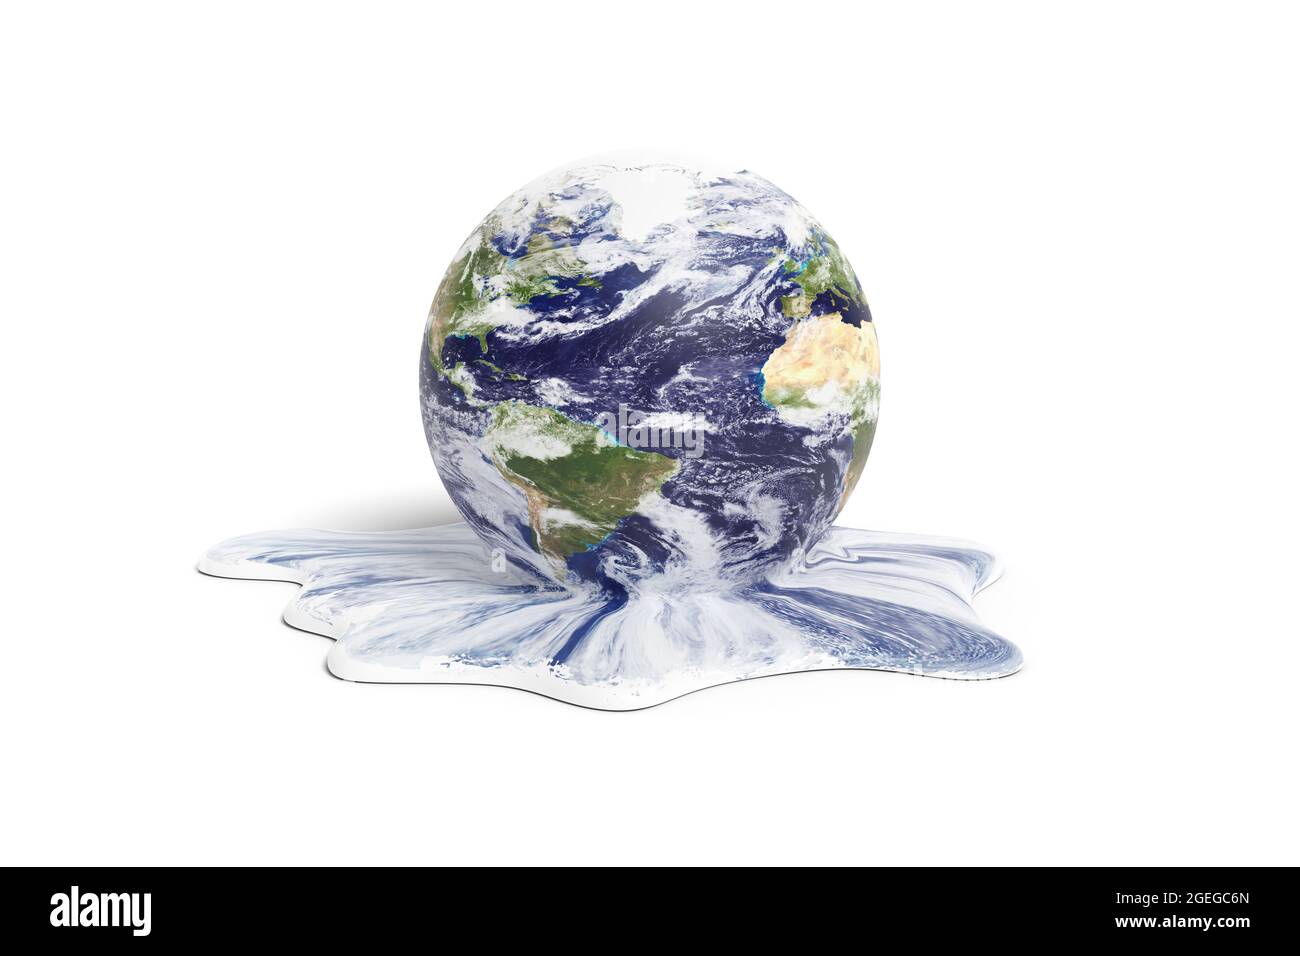 Planet earth melting isolated on white background. Global warming concept. 3d illustration. Stock Photo